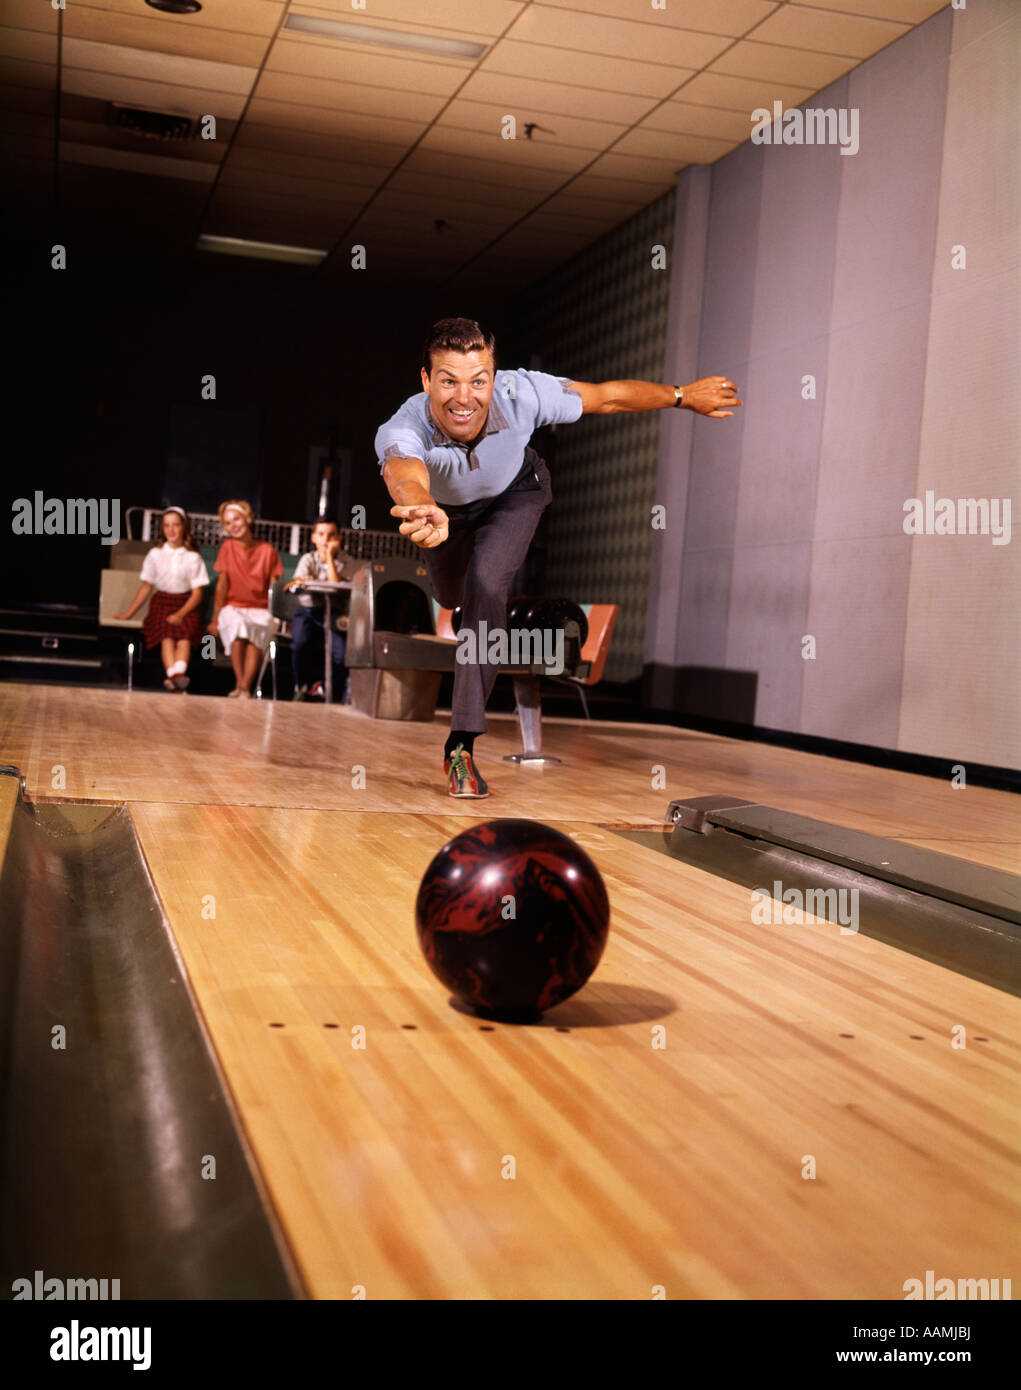 1960s 1970s SMILING MAN THROWING BOWLING BALL DOWN ALLEY AS FAMILY WATCHES IN BACKGROUND FUN DAD FATHER RETRO VINTAGE Stock Photo